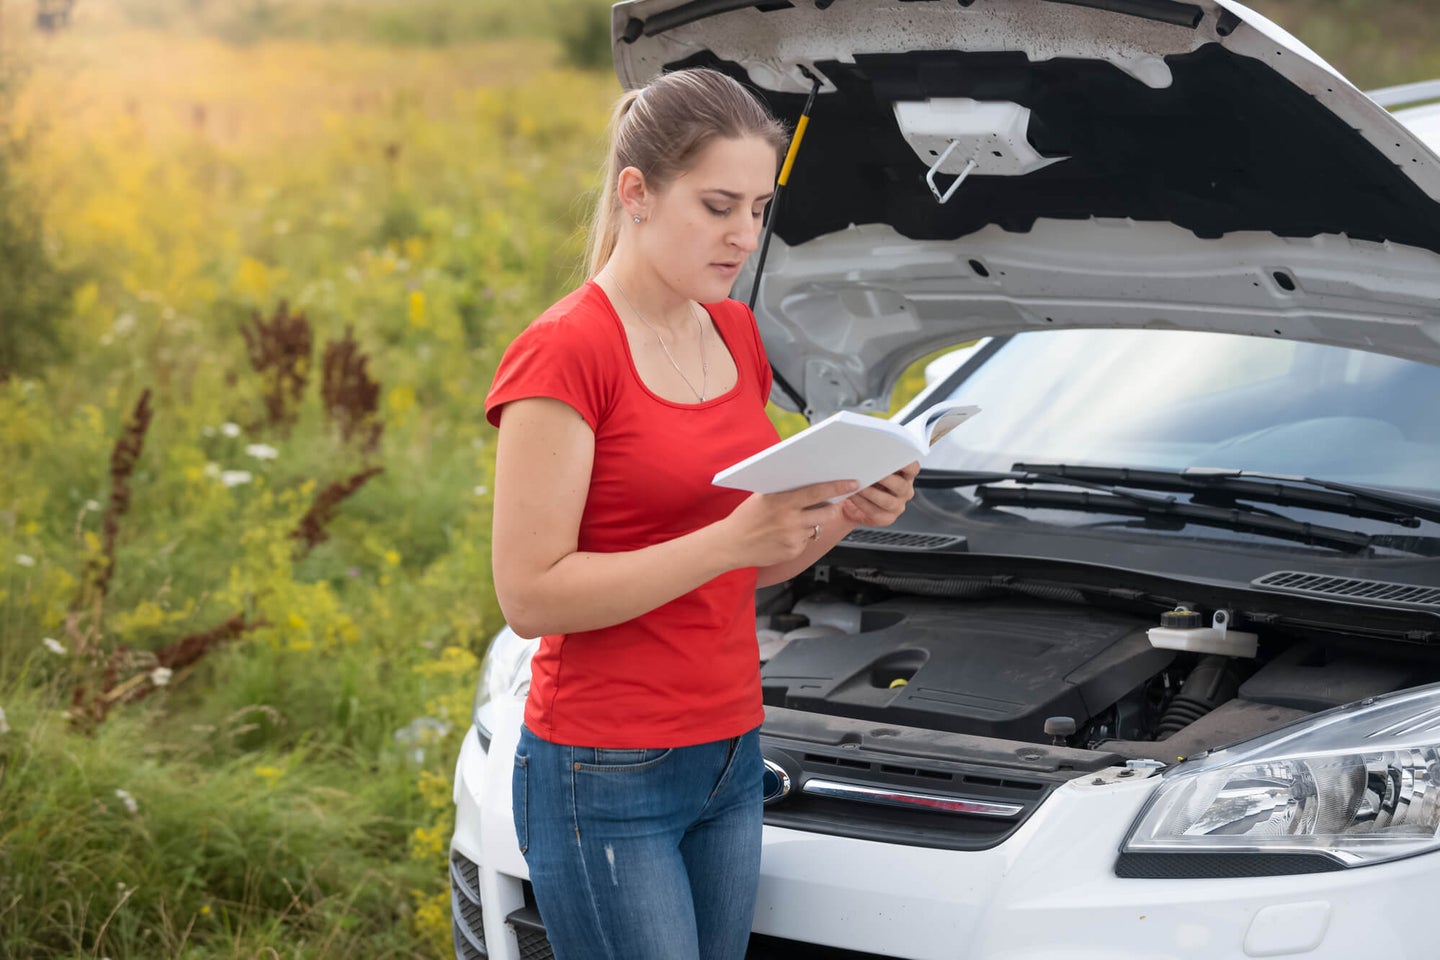 Best Auto Mechanic Books: Learn More About the Industry